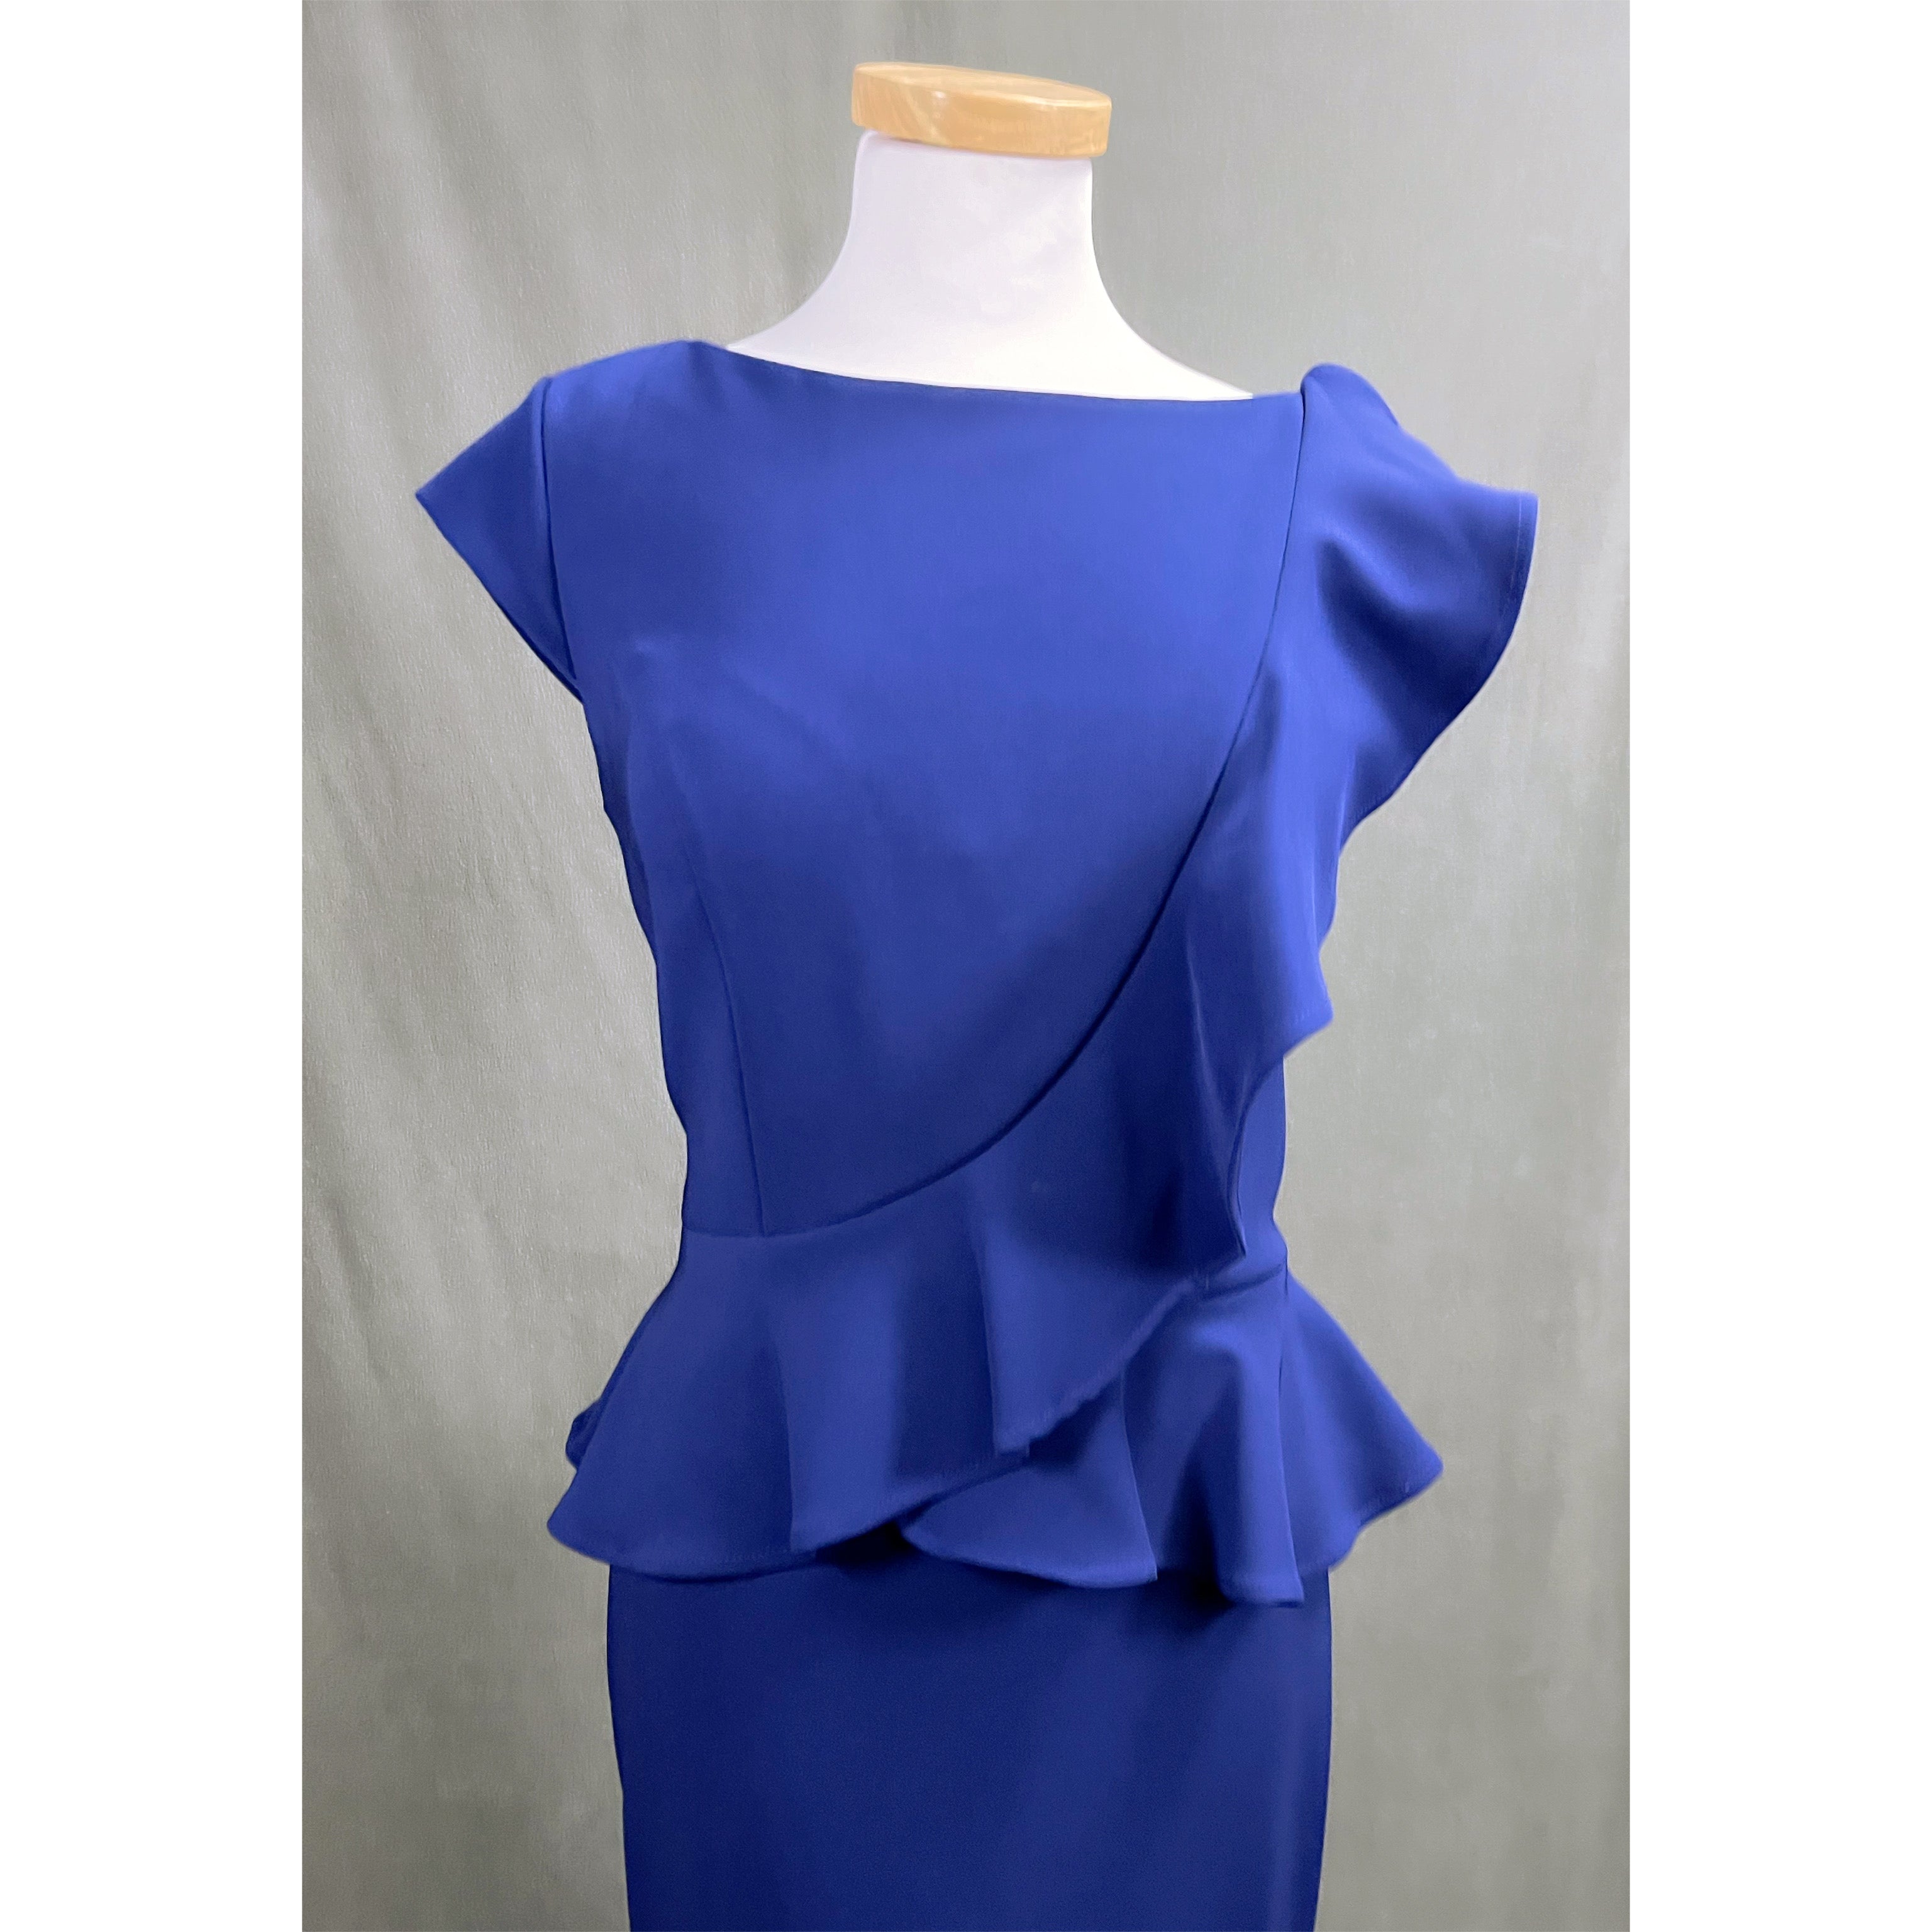 MGNY sapphire blue dress, size 8, NEW WITH TAGS!